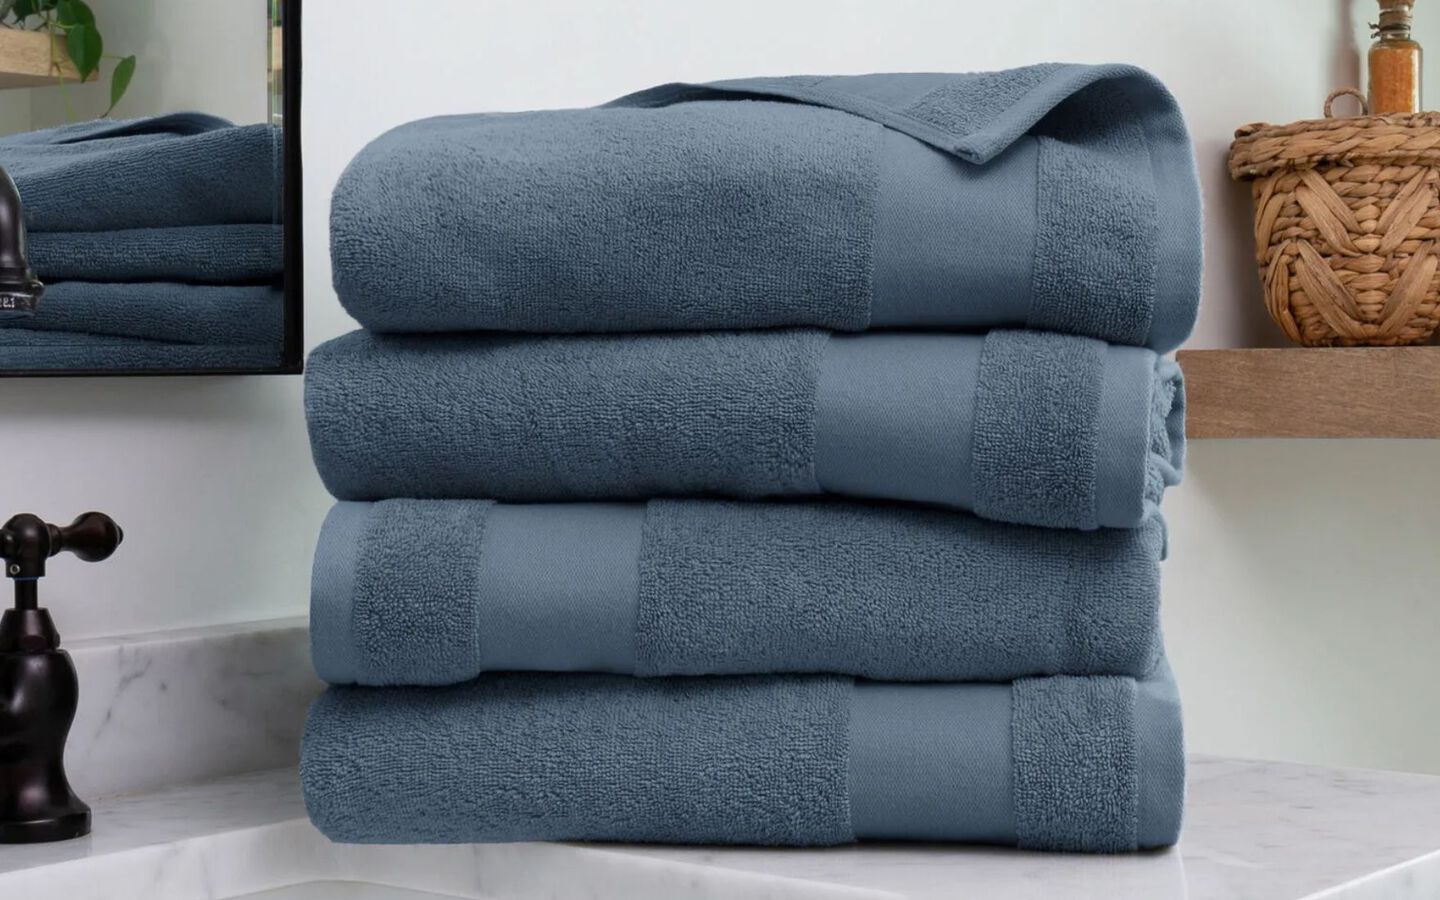 Kitchen counter with four folded blue towels sitting on top